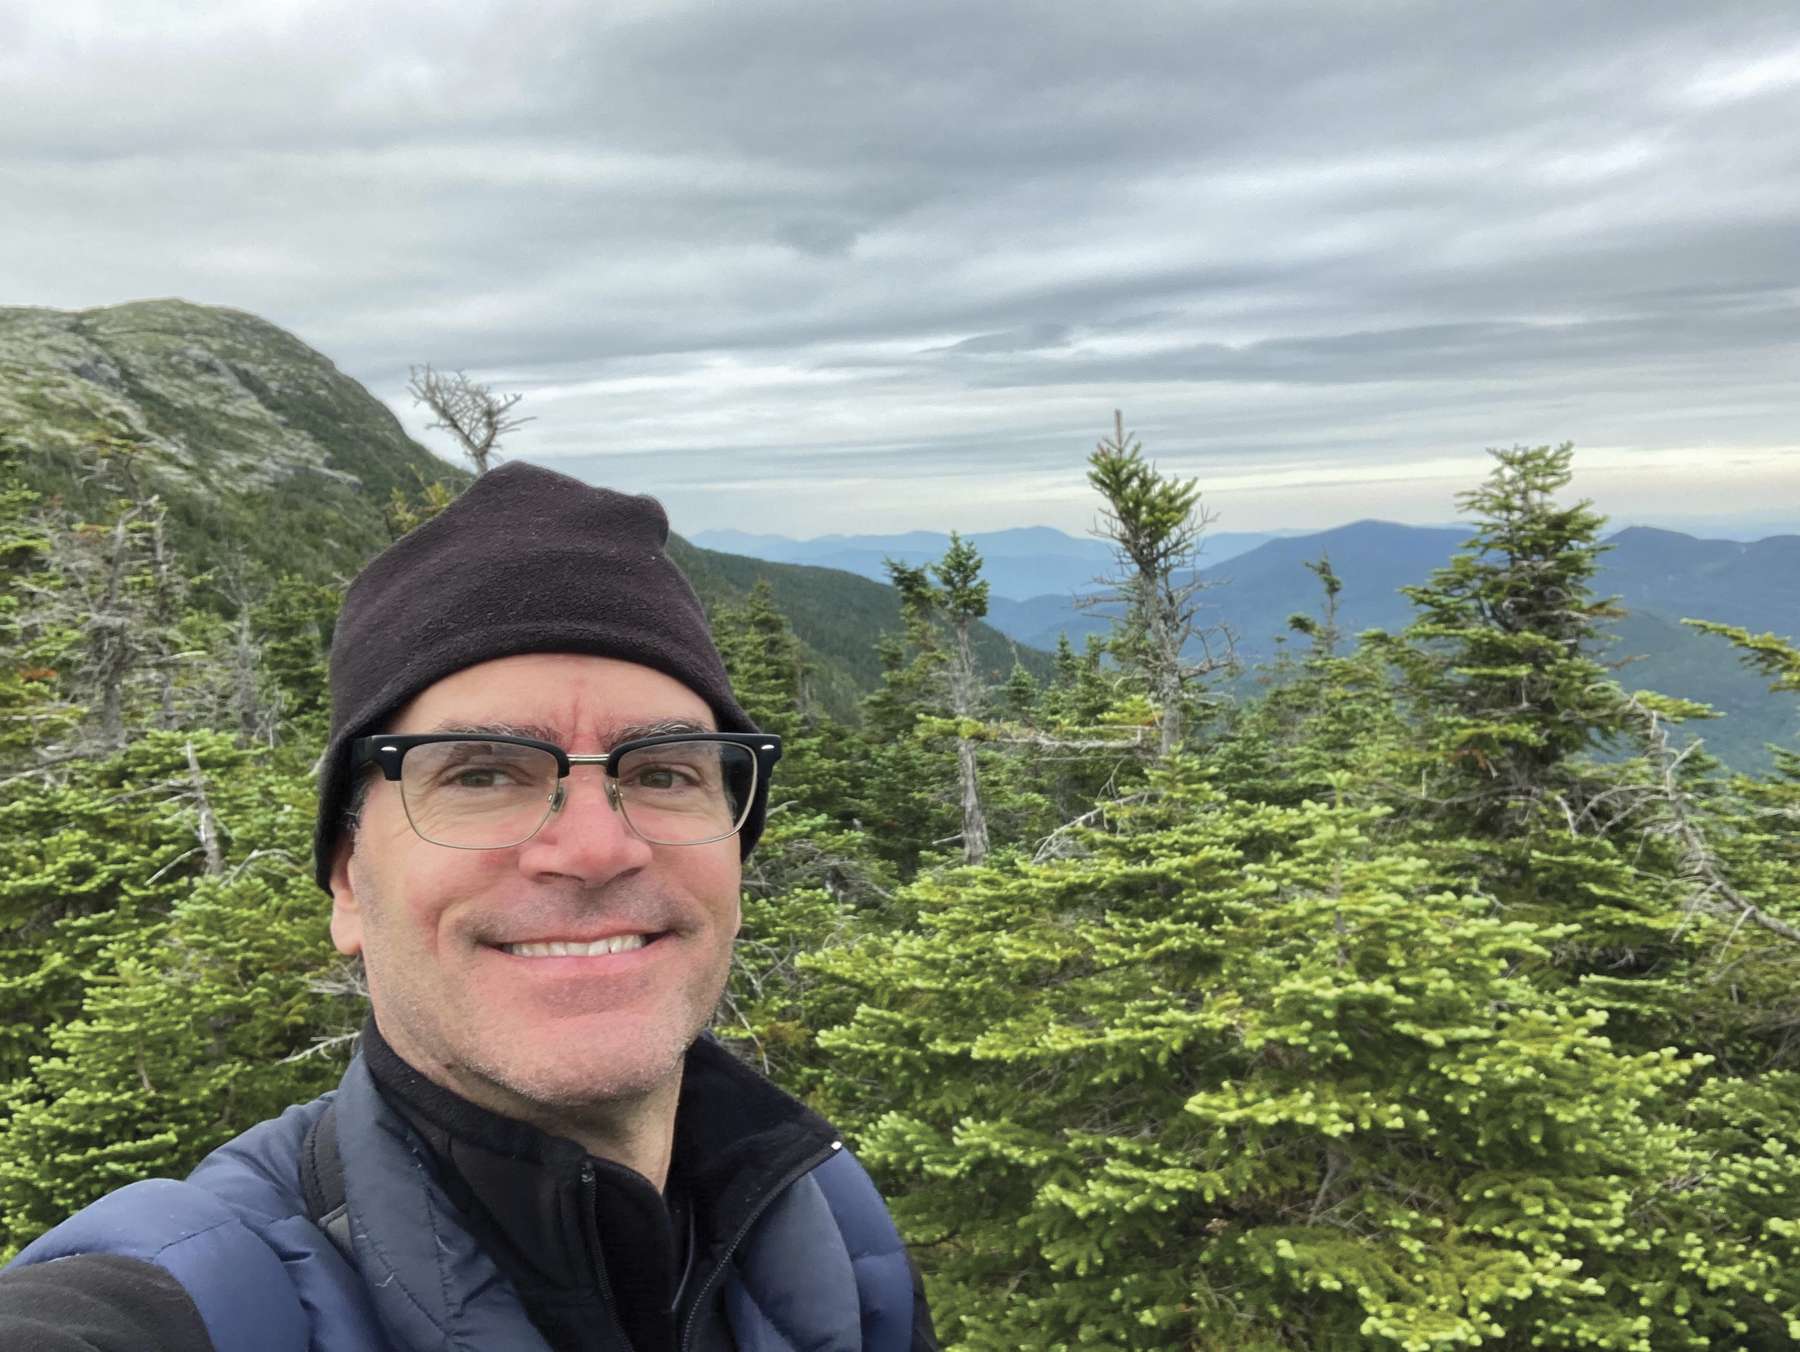 New York State Museum Ornithologist Jeremy Kirchman researches birds atop Vermont's Mount Mansfield. Photo courtesy of Jeremy Kirchman